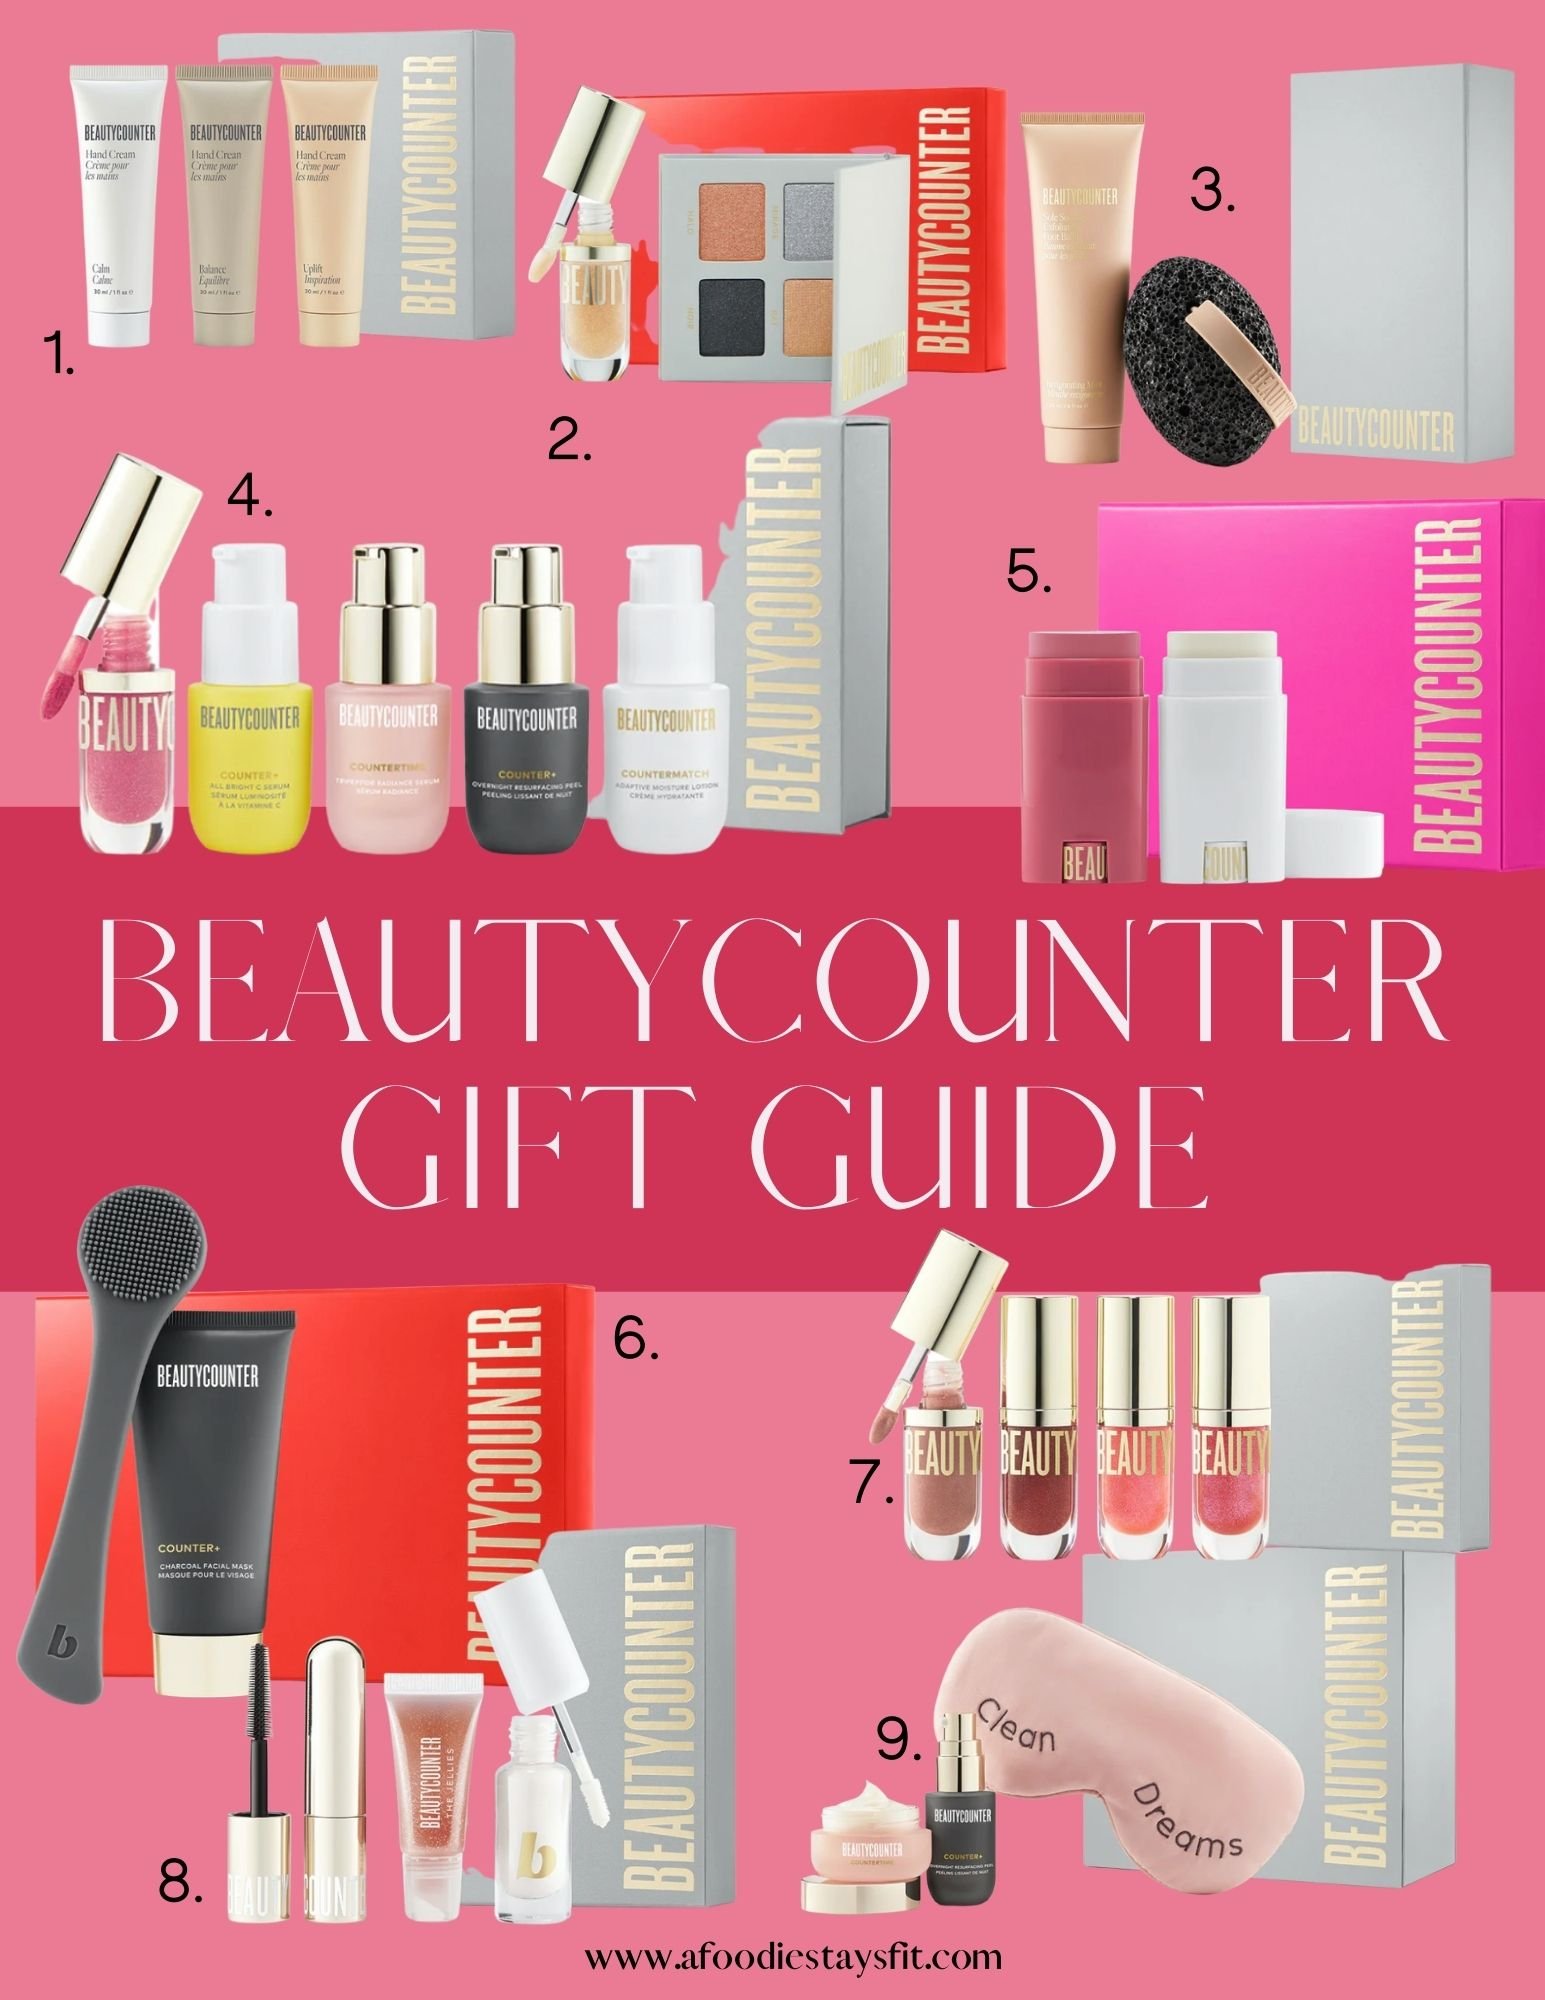 Beautycounter gifts | 2021 Gift Guides